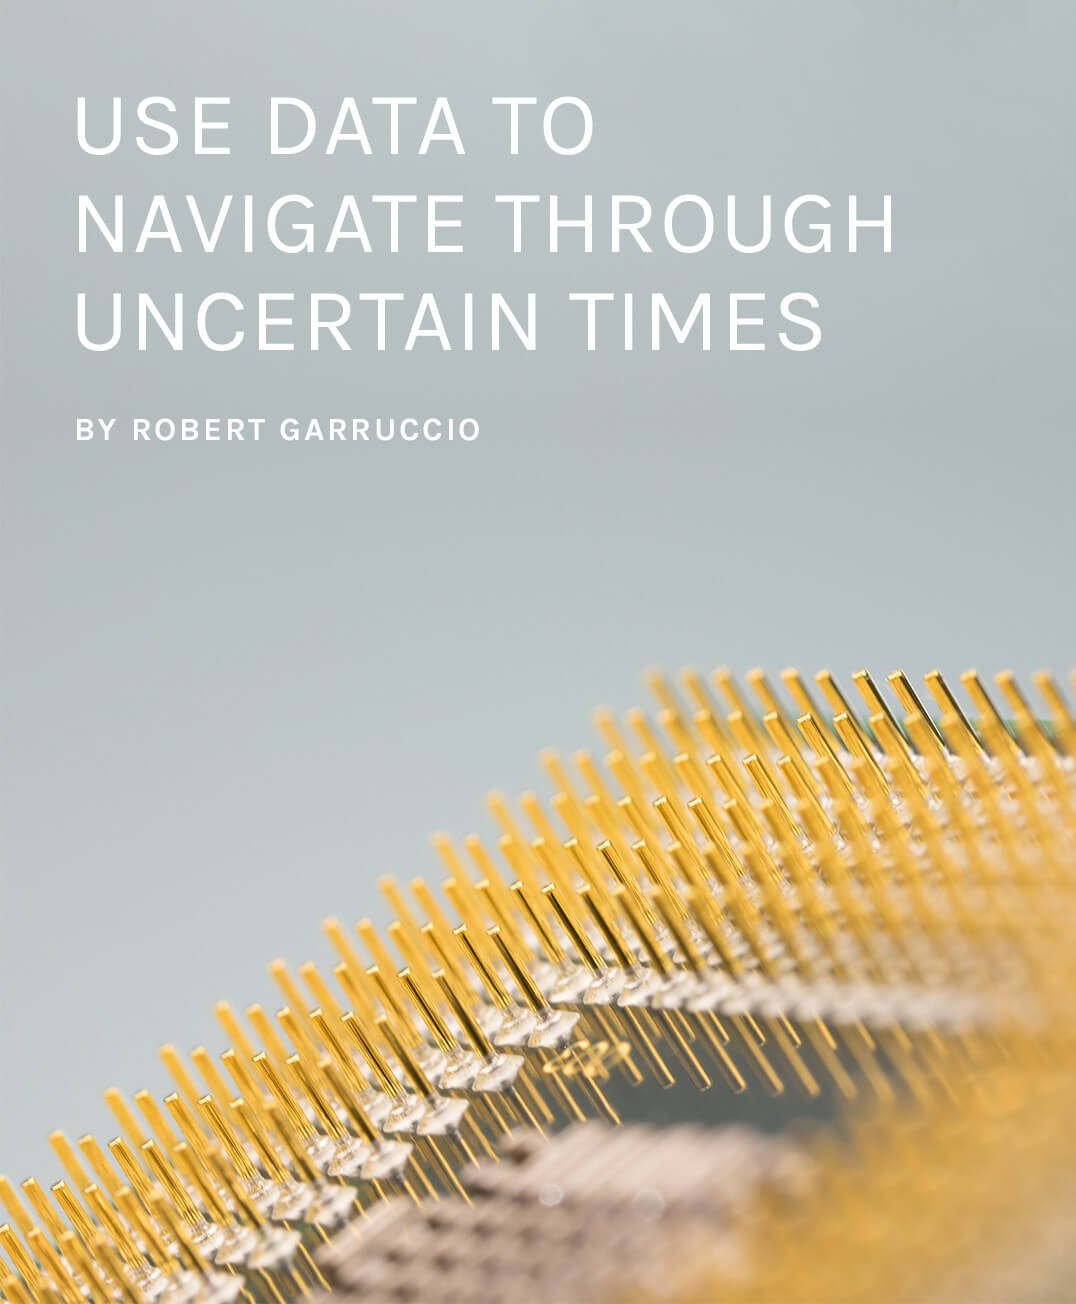 Use data to navigate through uncertain times